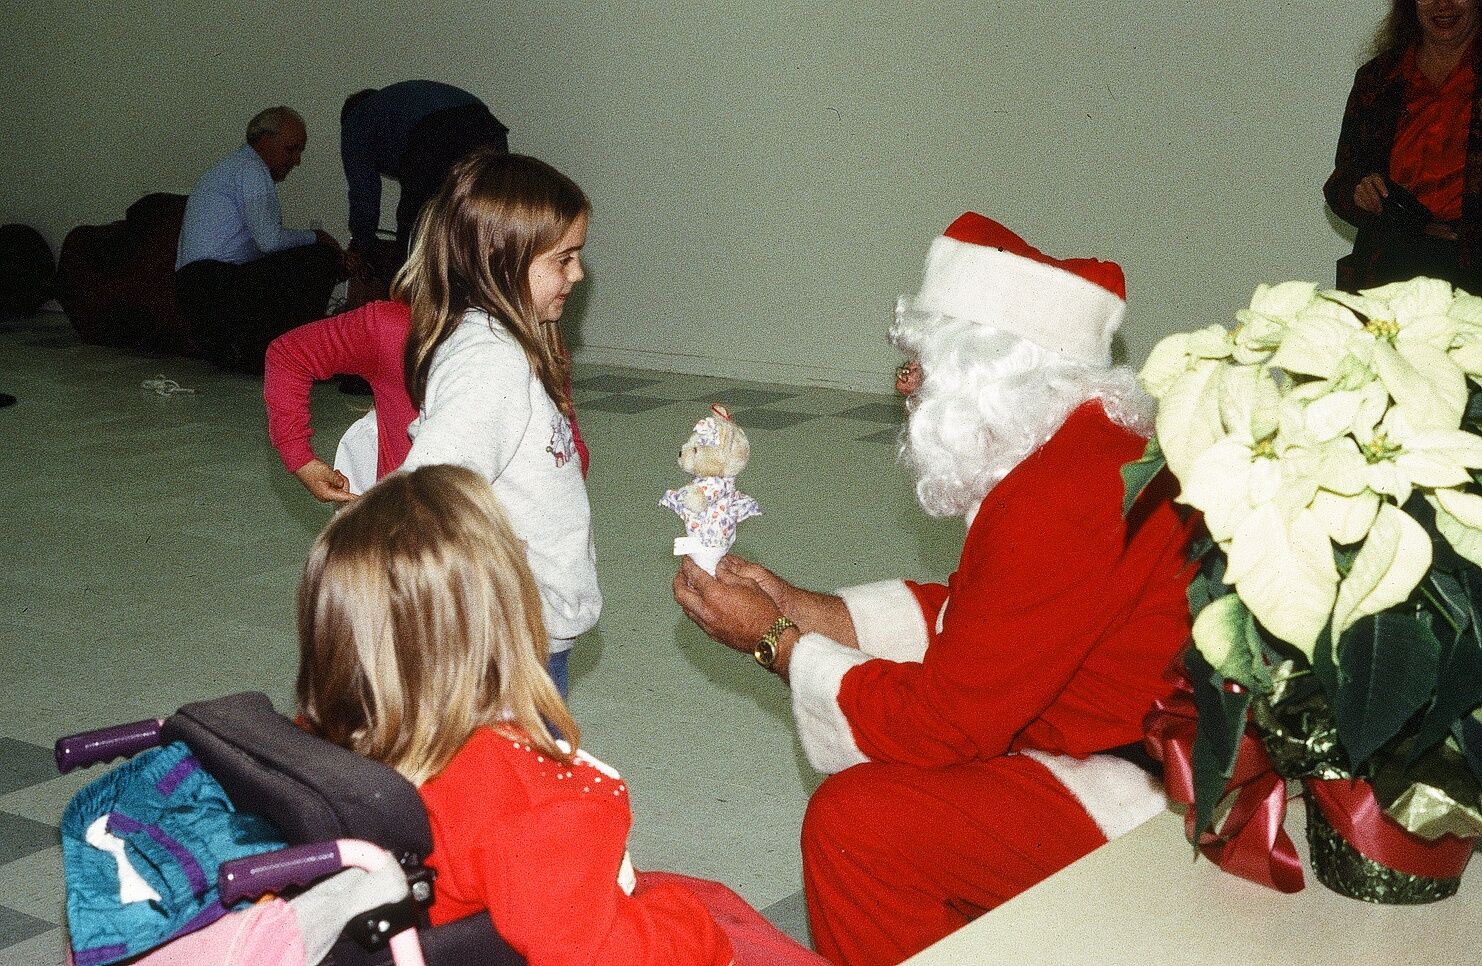 Santa reaches out to help